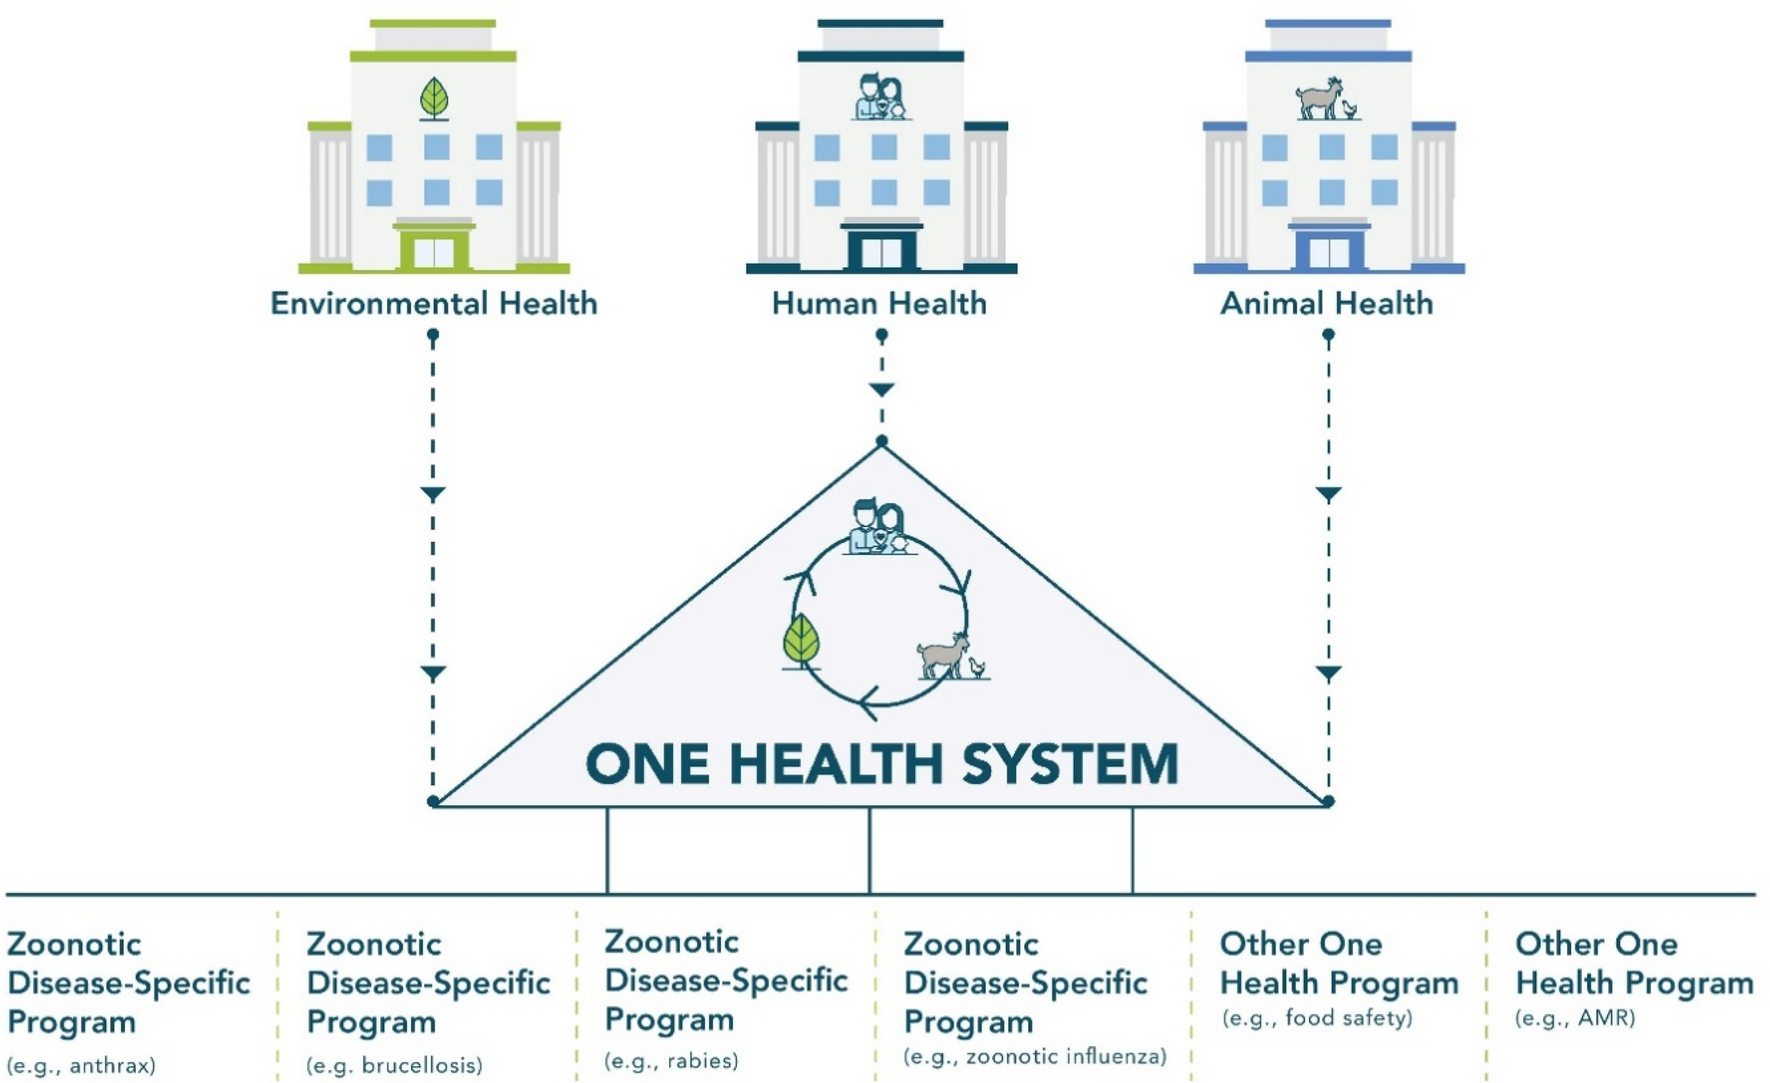 A generalizable one health framework for the control of zoonotic diseases |  Scientific Reports